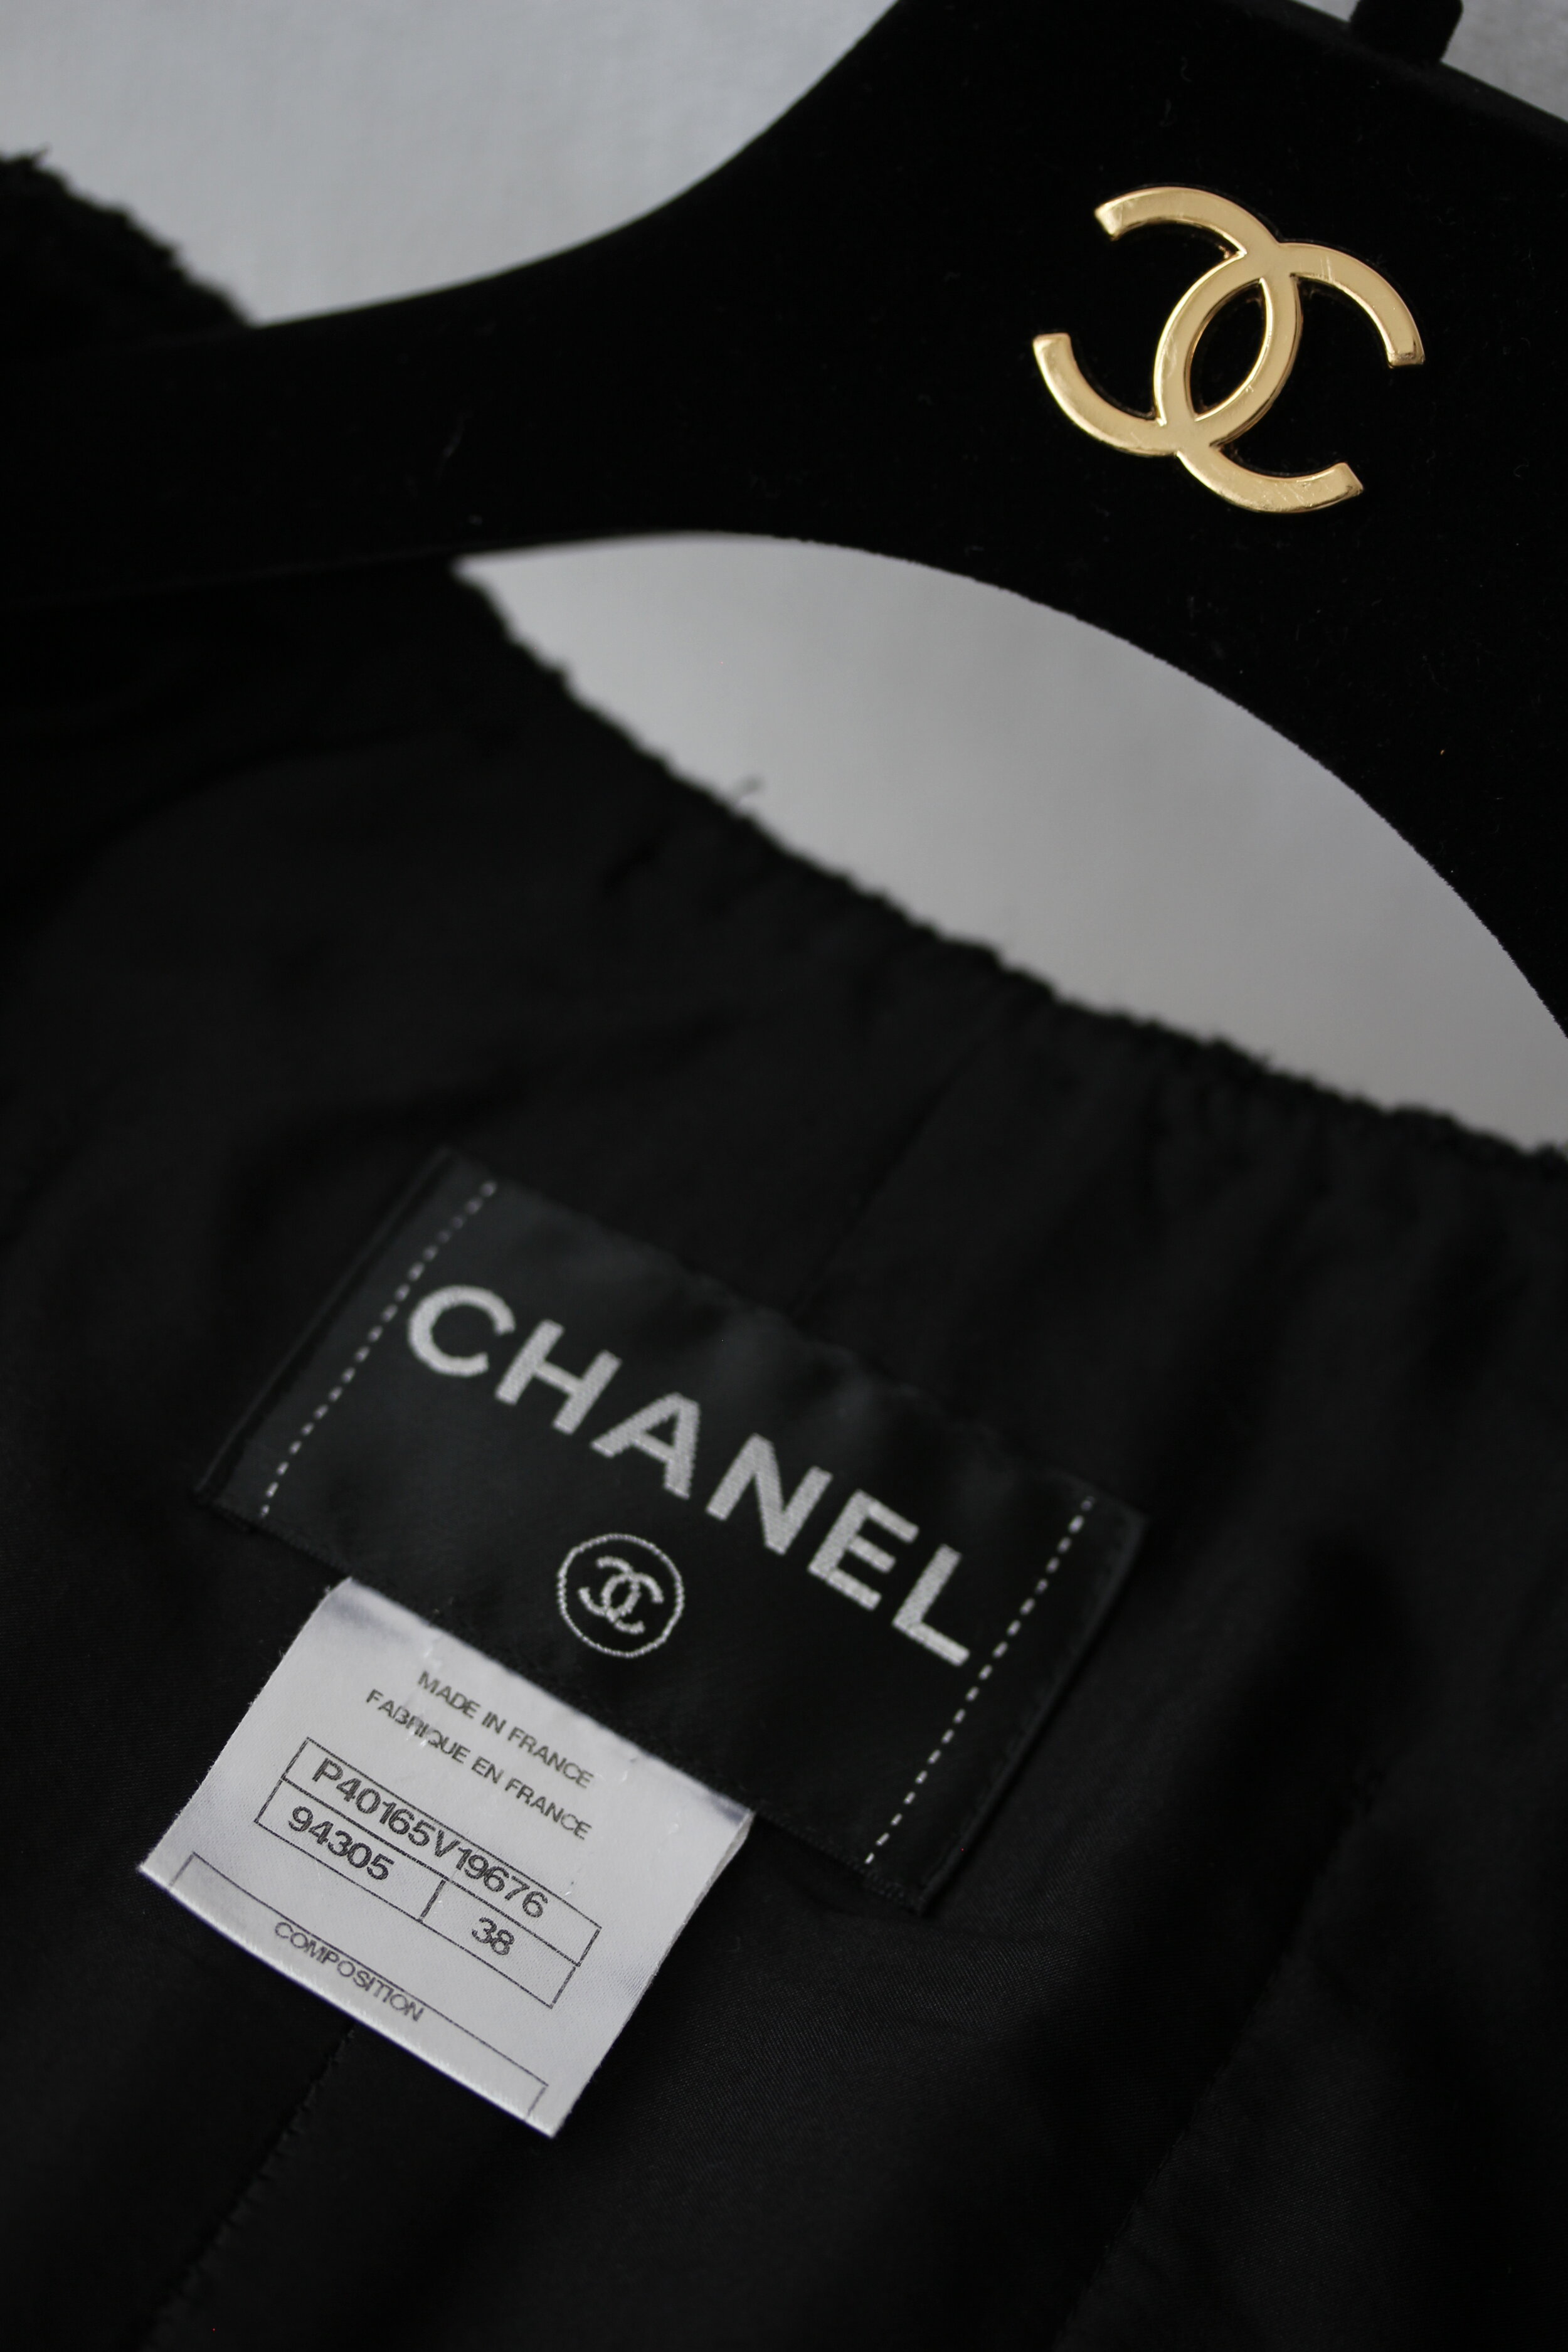 clothing brand chanel